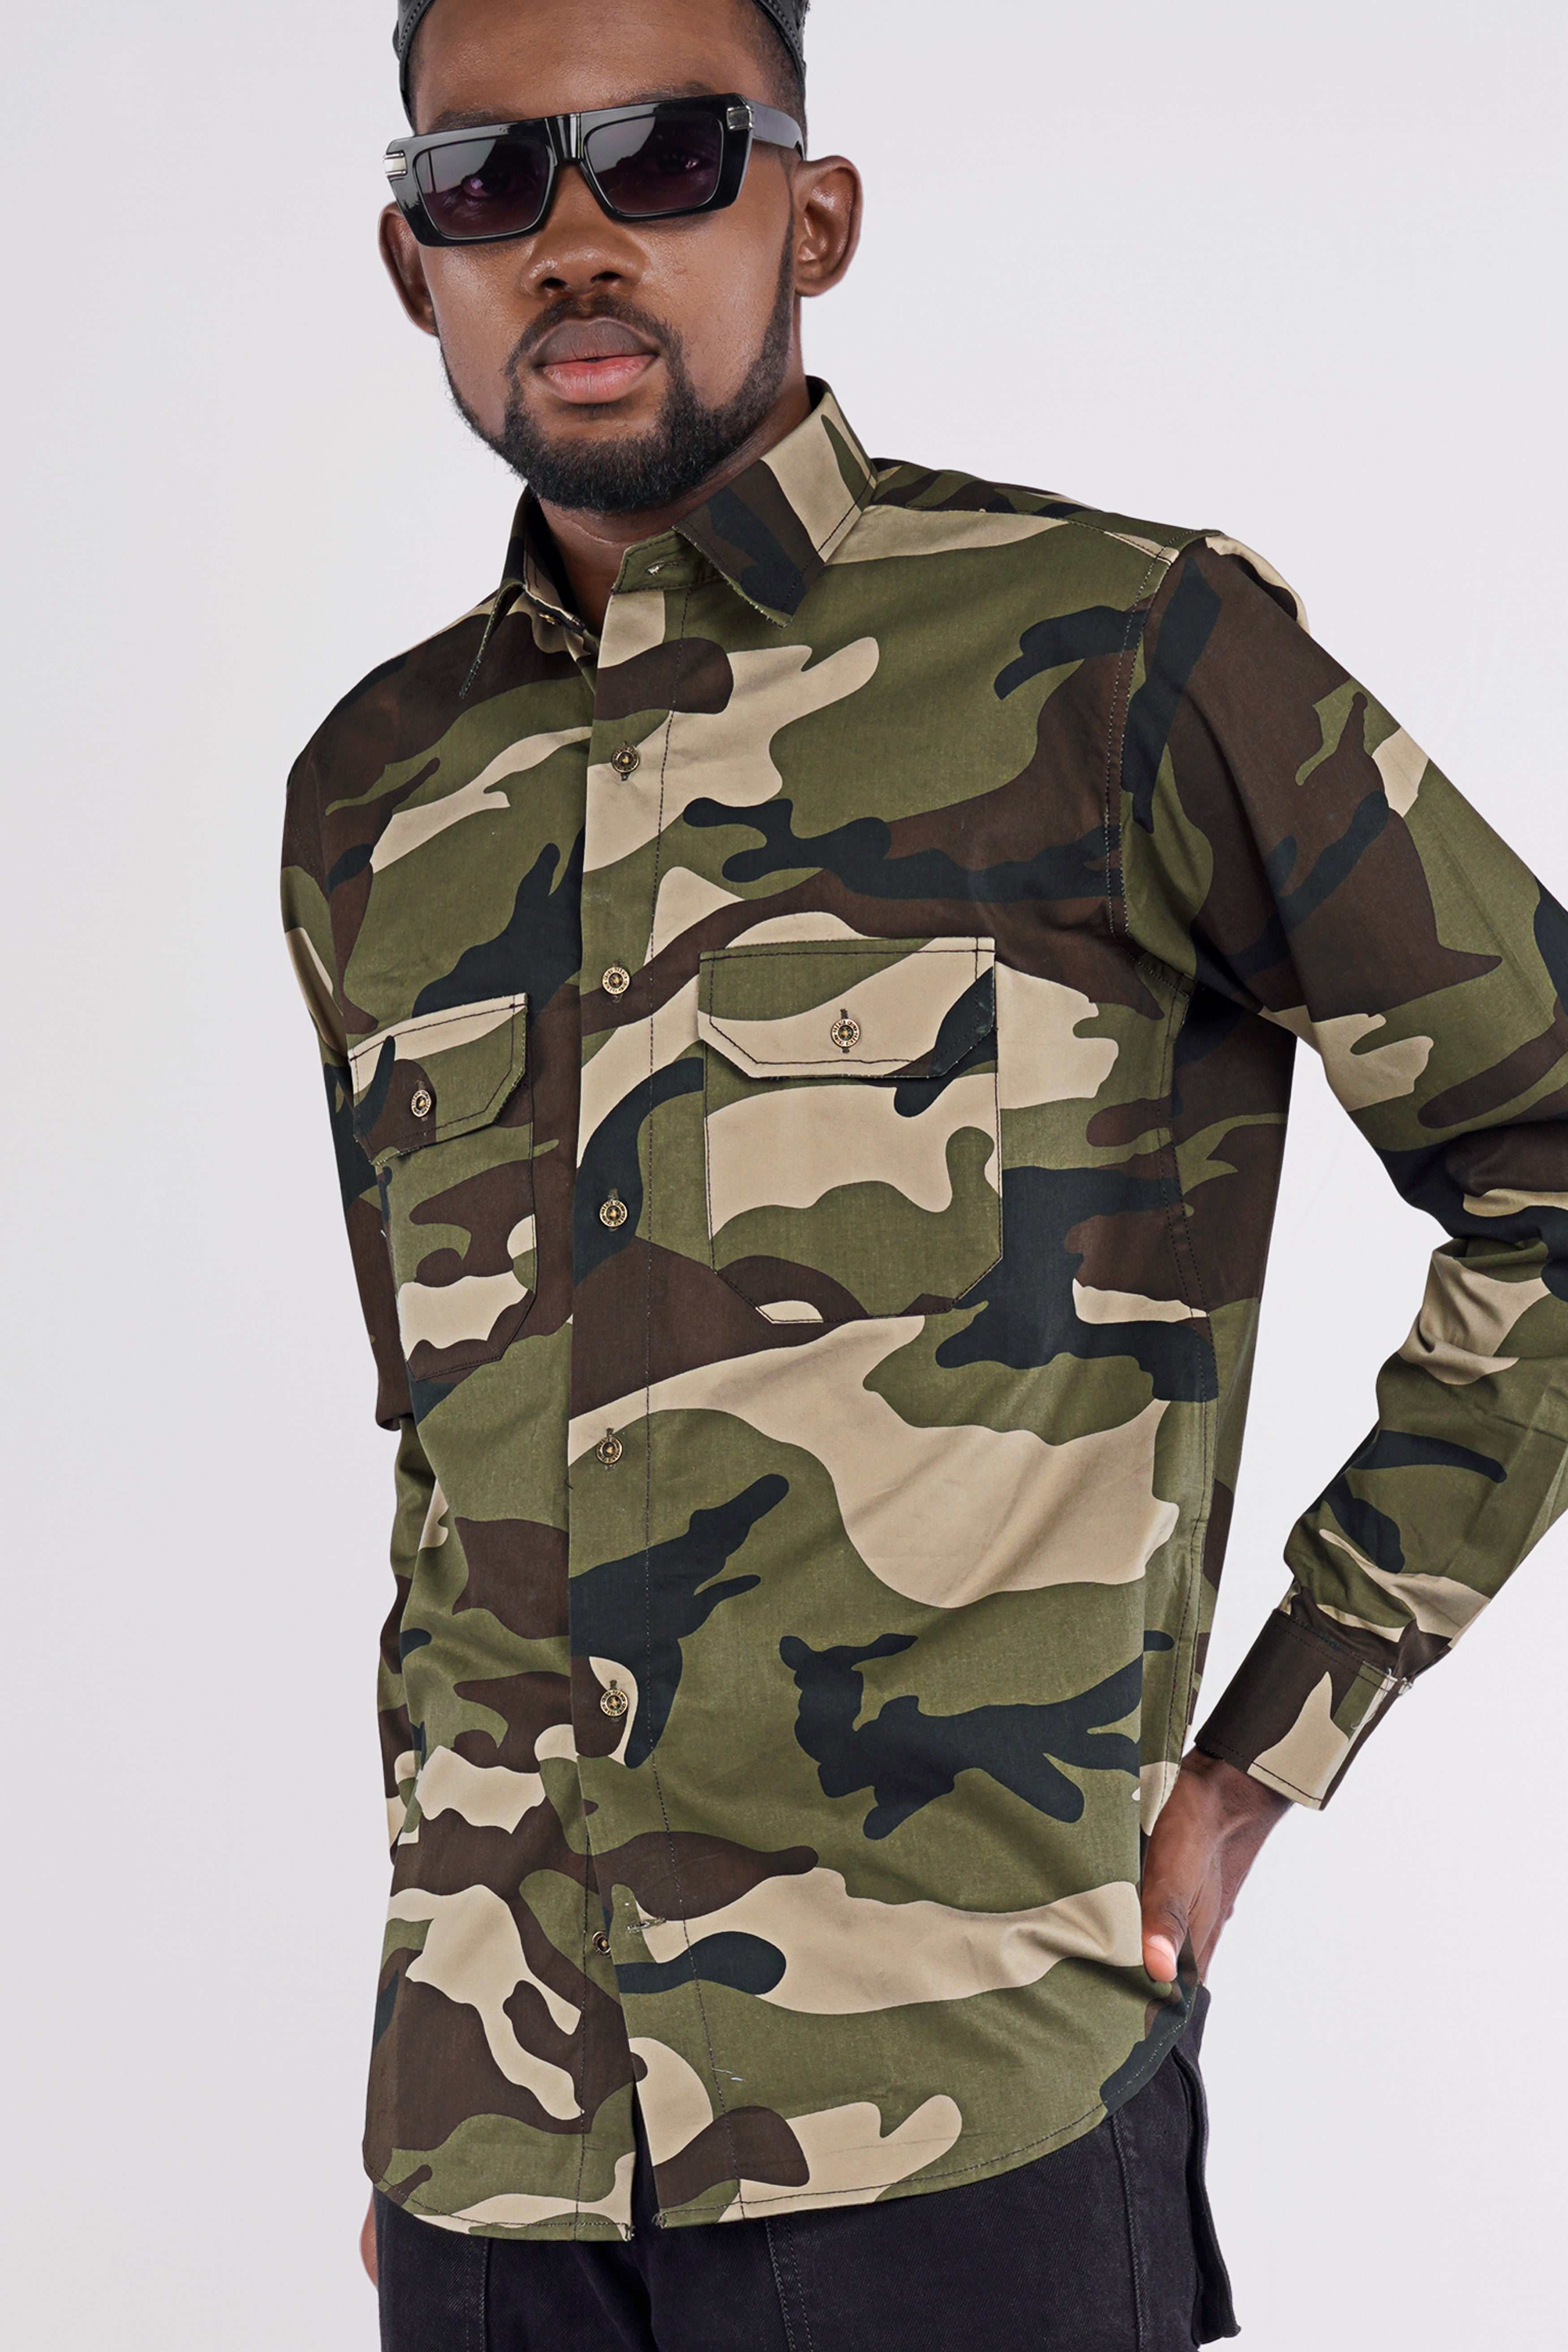 Finch Green with Wenge Brown Camouflage Printed Royal Oxford Designer Shirt